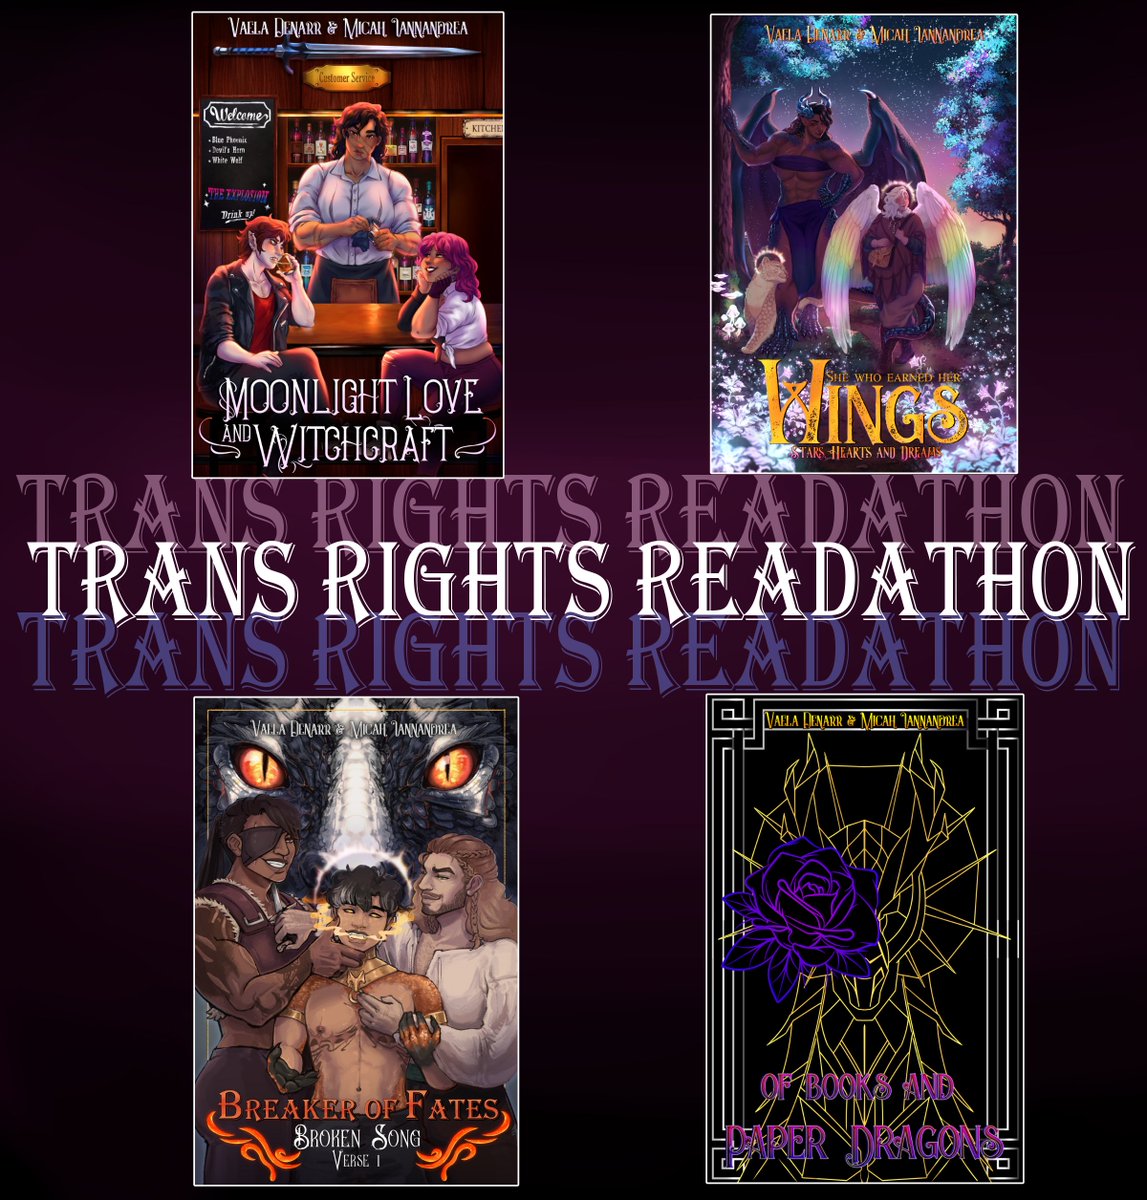 The #TransRightsReadathon is happening again from the 22nd of March to the 29th, so we're putting ours on sale!

If you're looking for ownvoice trans books with queerplatonic relationships, polyamory, and giant lesbian dragons, werewolves and vampires, we've got you covered!